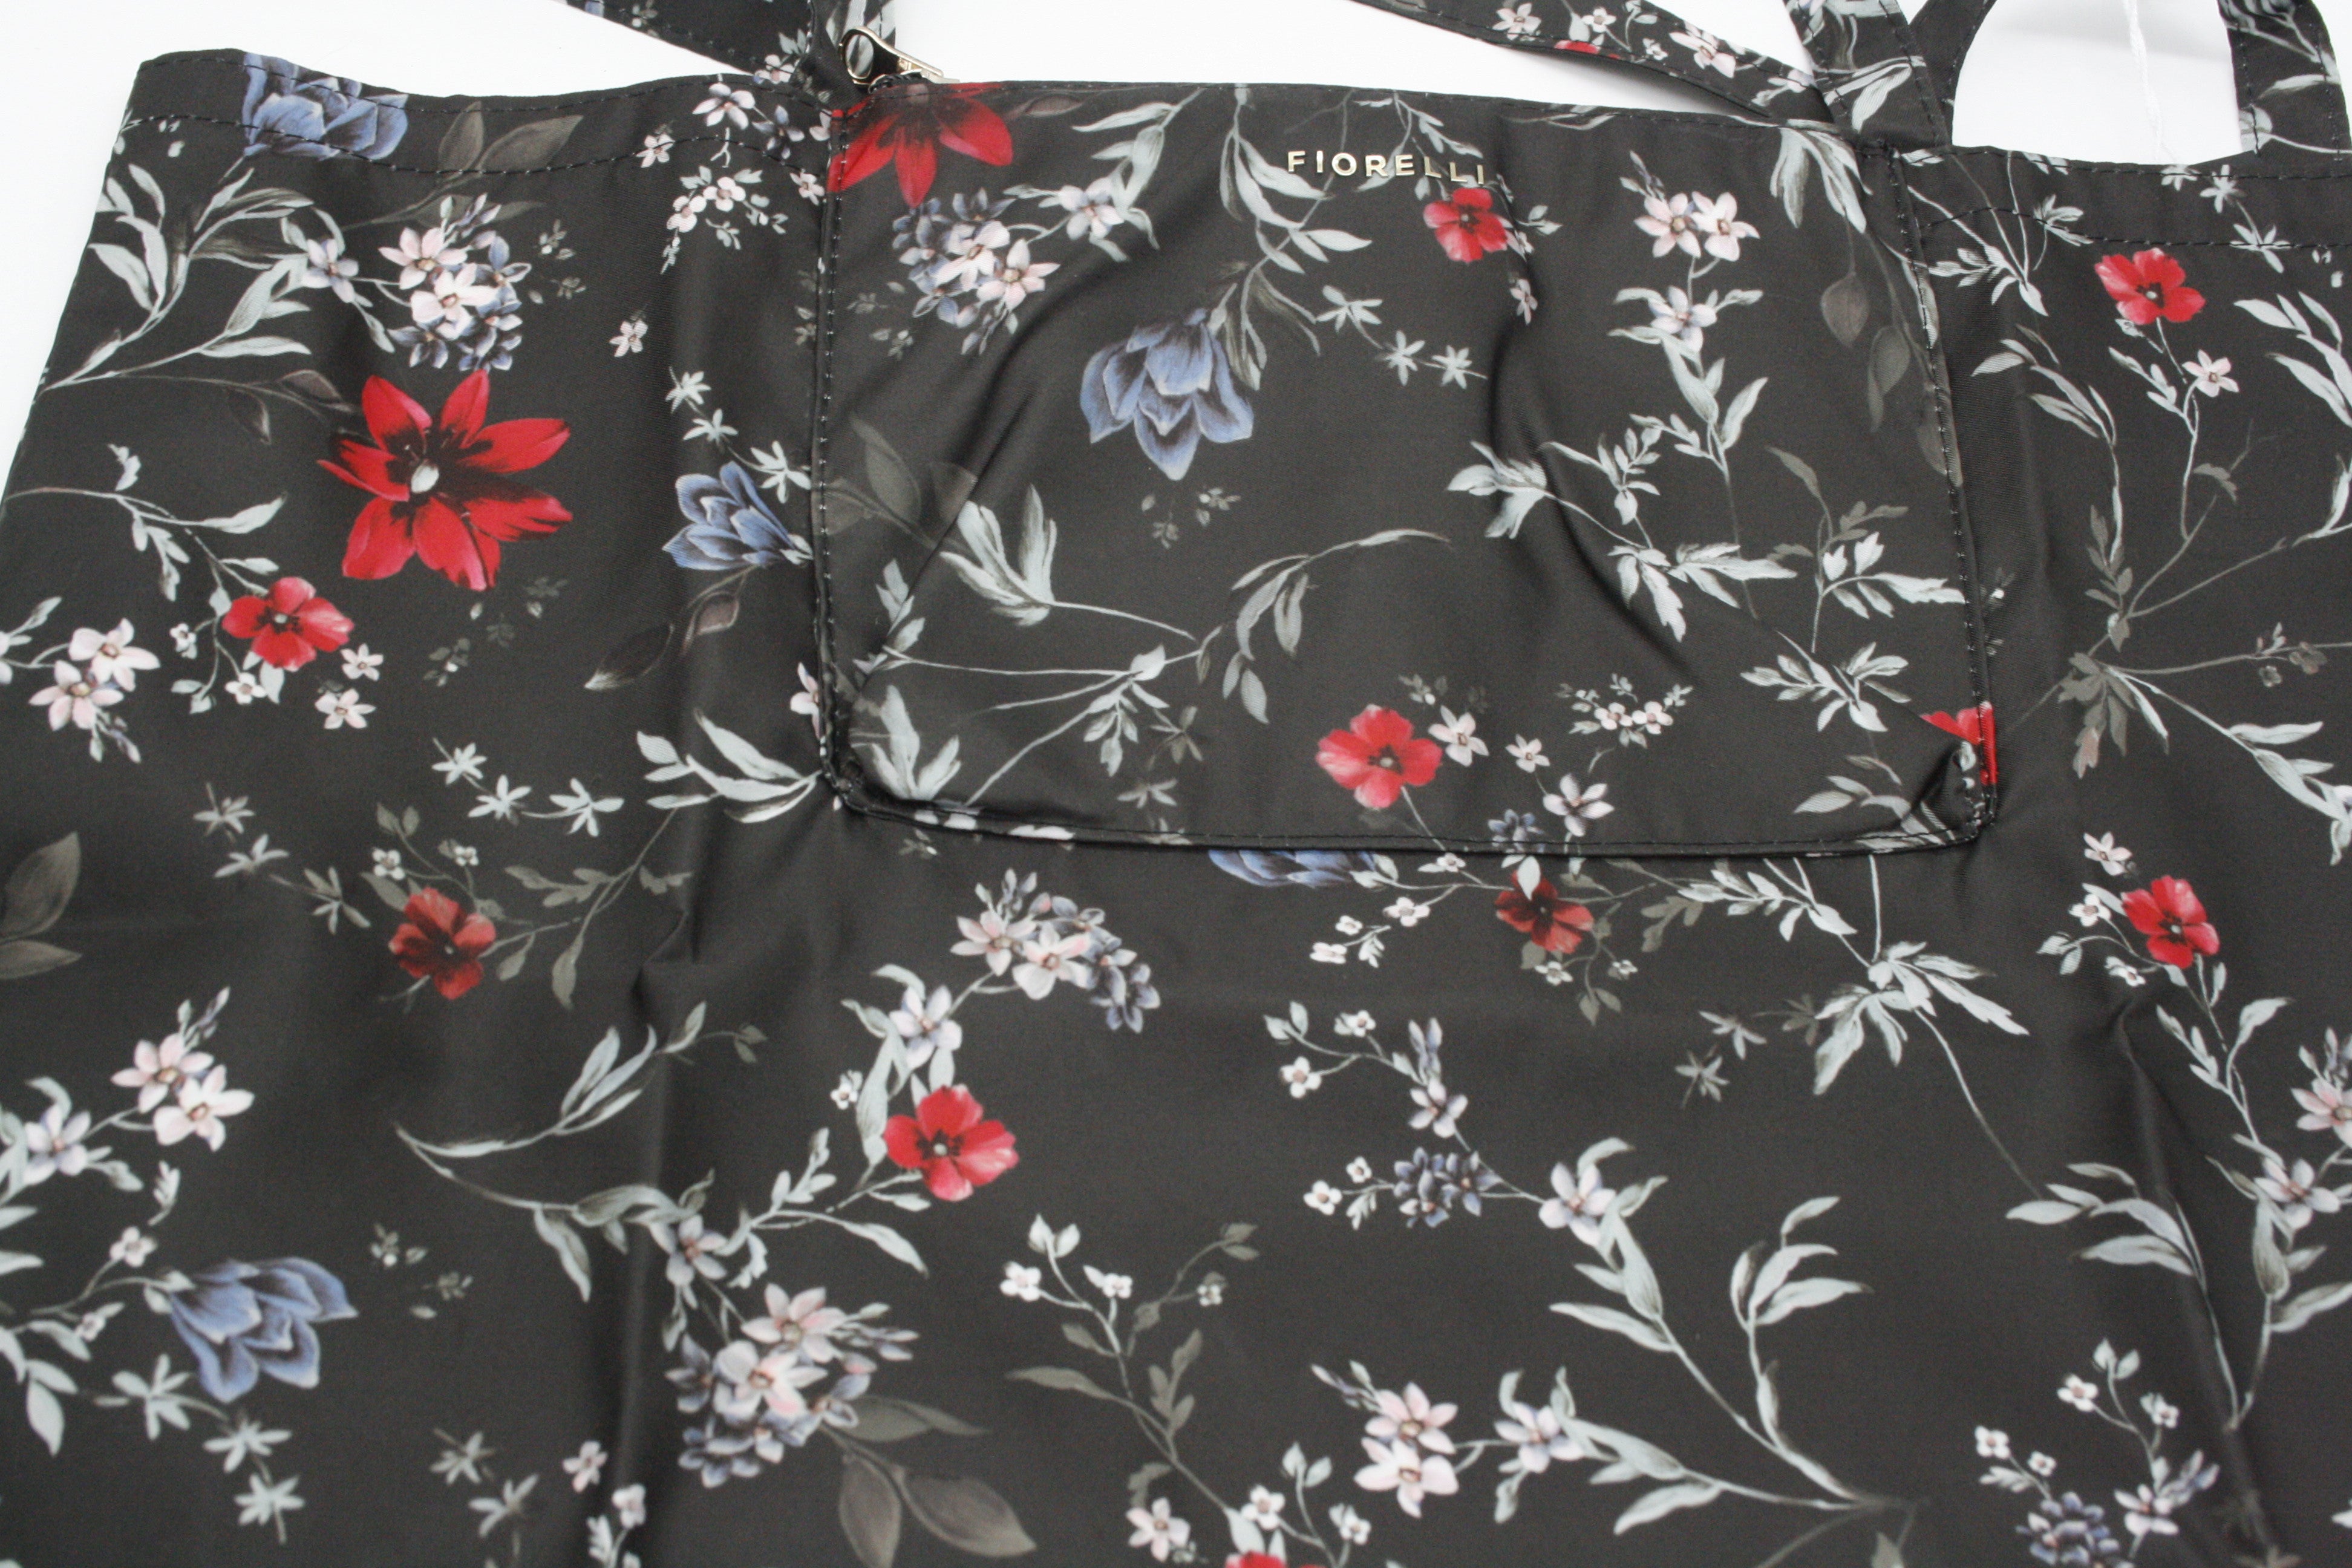 FIORELLI FLORAL MIA Grab Bag Brand New With Tags £24.00 - PicClick UK